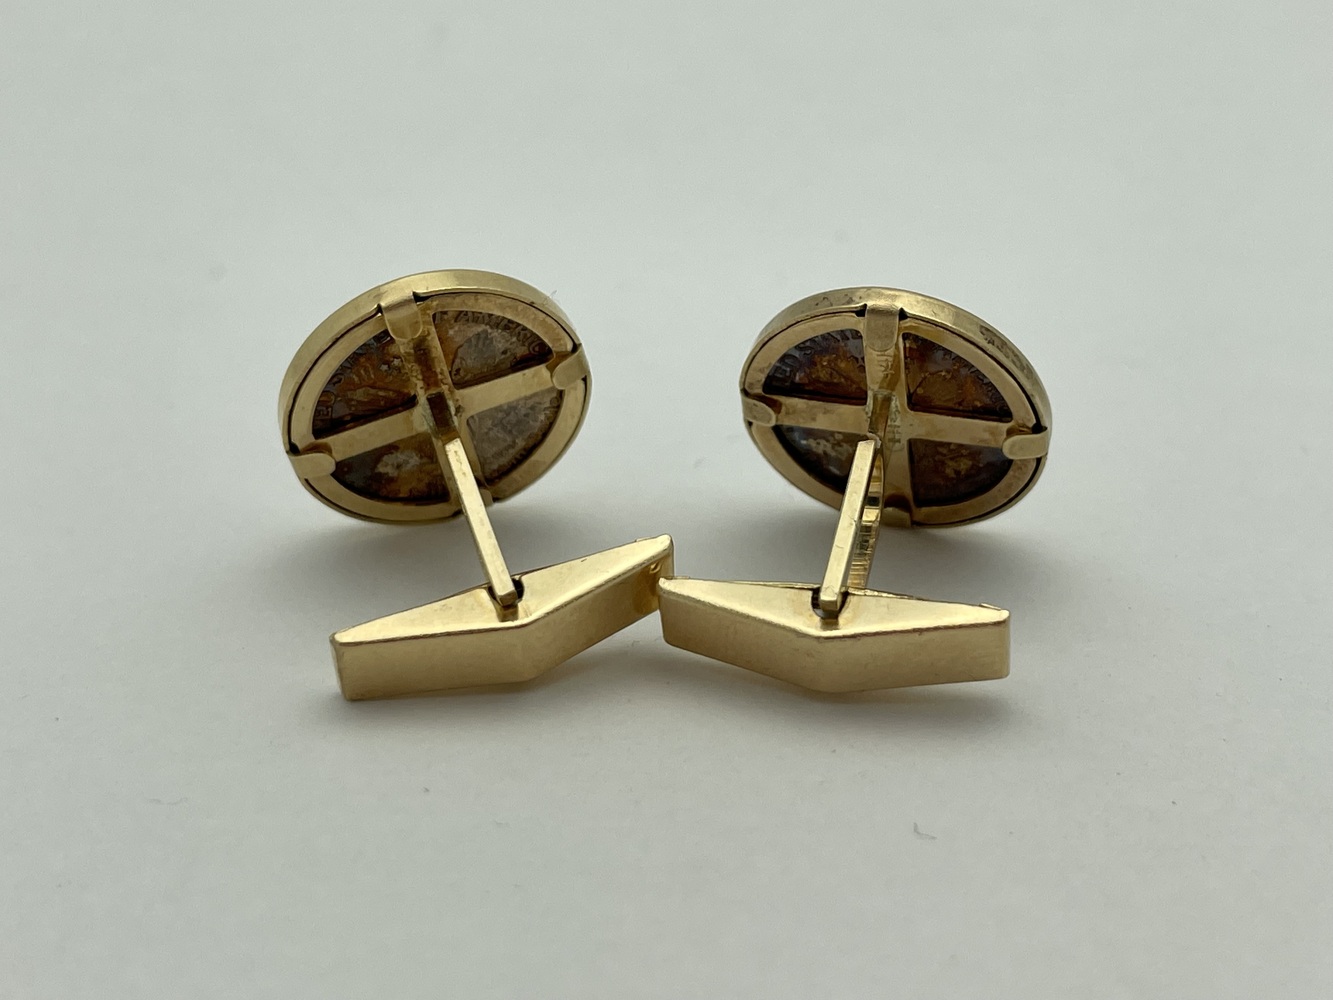  14kt Yellow Gold Cufflinks with 1/10 oz Silver Walking Liberty Coins